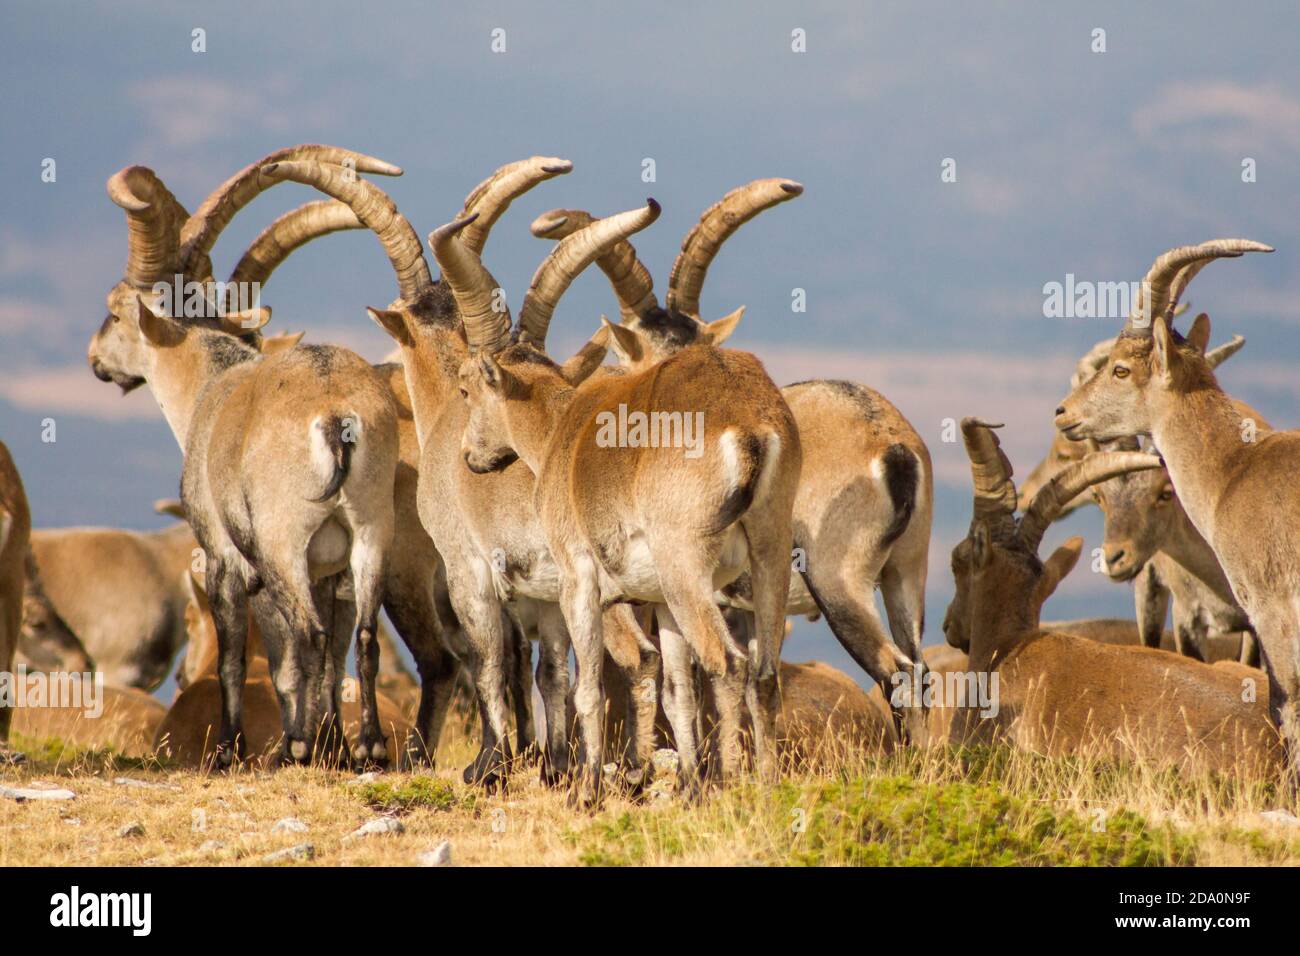 P.N. de Guadarrama, Madrid, Spain. Back view of herd of male wild mountain goats standing together in summer. Stock Photo